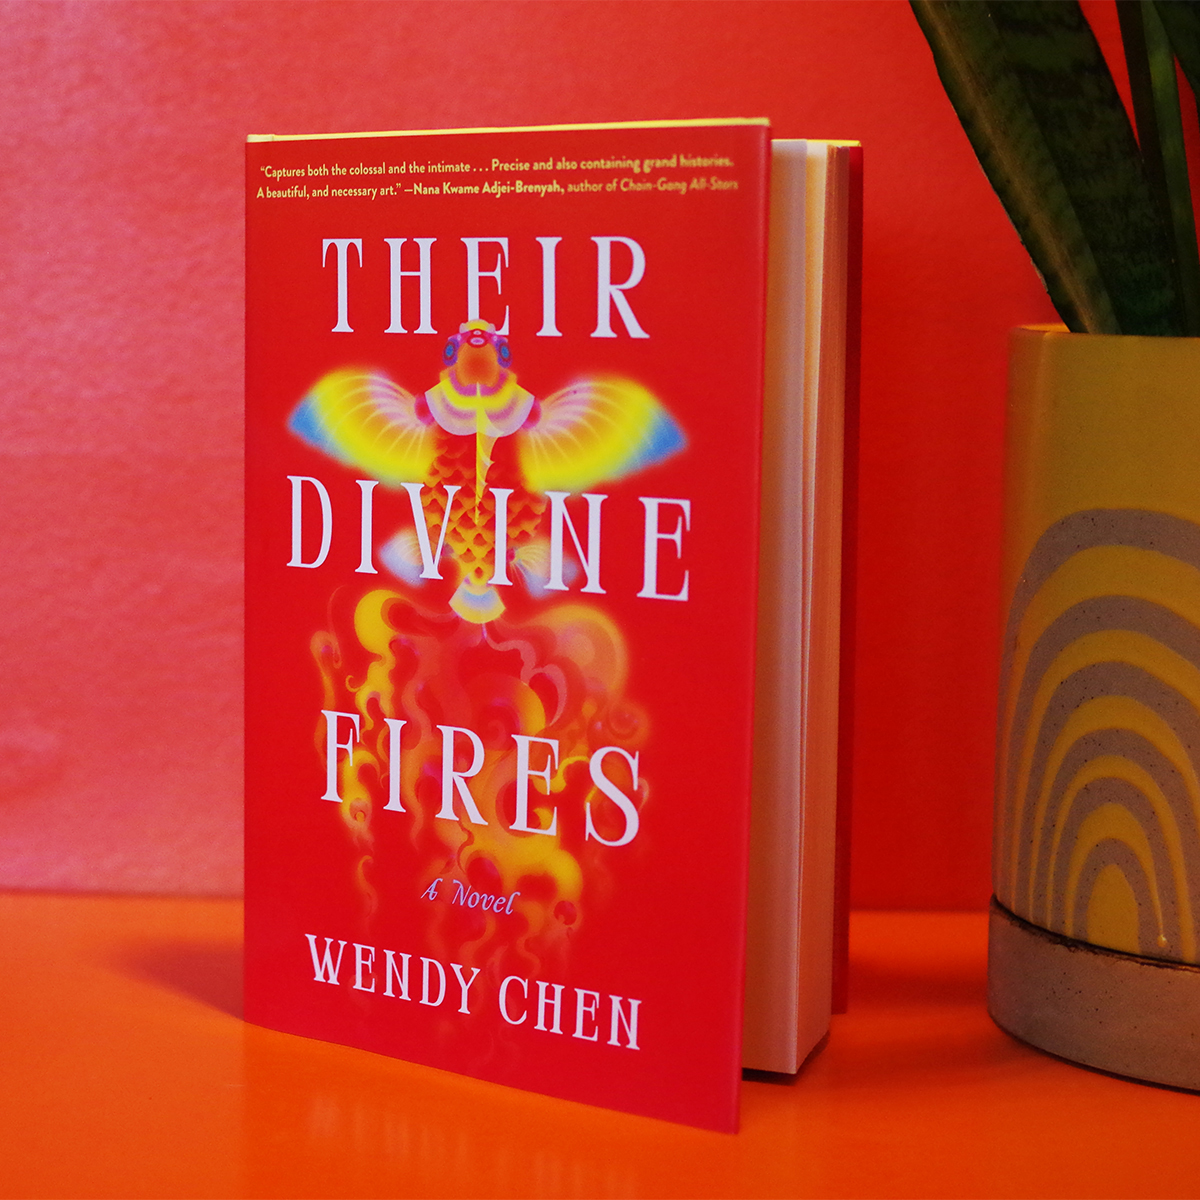 'A poignant, impressive debut.' —Kirkus Reviews (starred review) ✪ 𝙏𝙝𝙚𝙞𝙧 𝘿𝙞𝙫𝙞𝙣𝙚 𝙁𝙞𝙧𝙚𝙨 by Wendy Chen ow.ly/HHrz50RAWk8 Follow @KirkusReviews for more book recommendations!